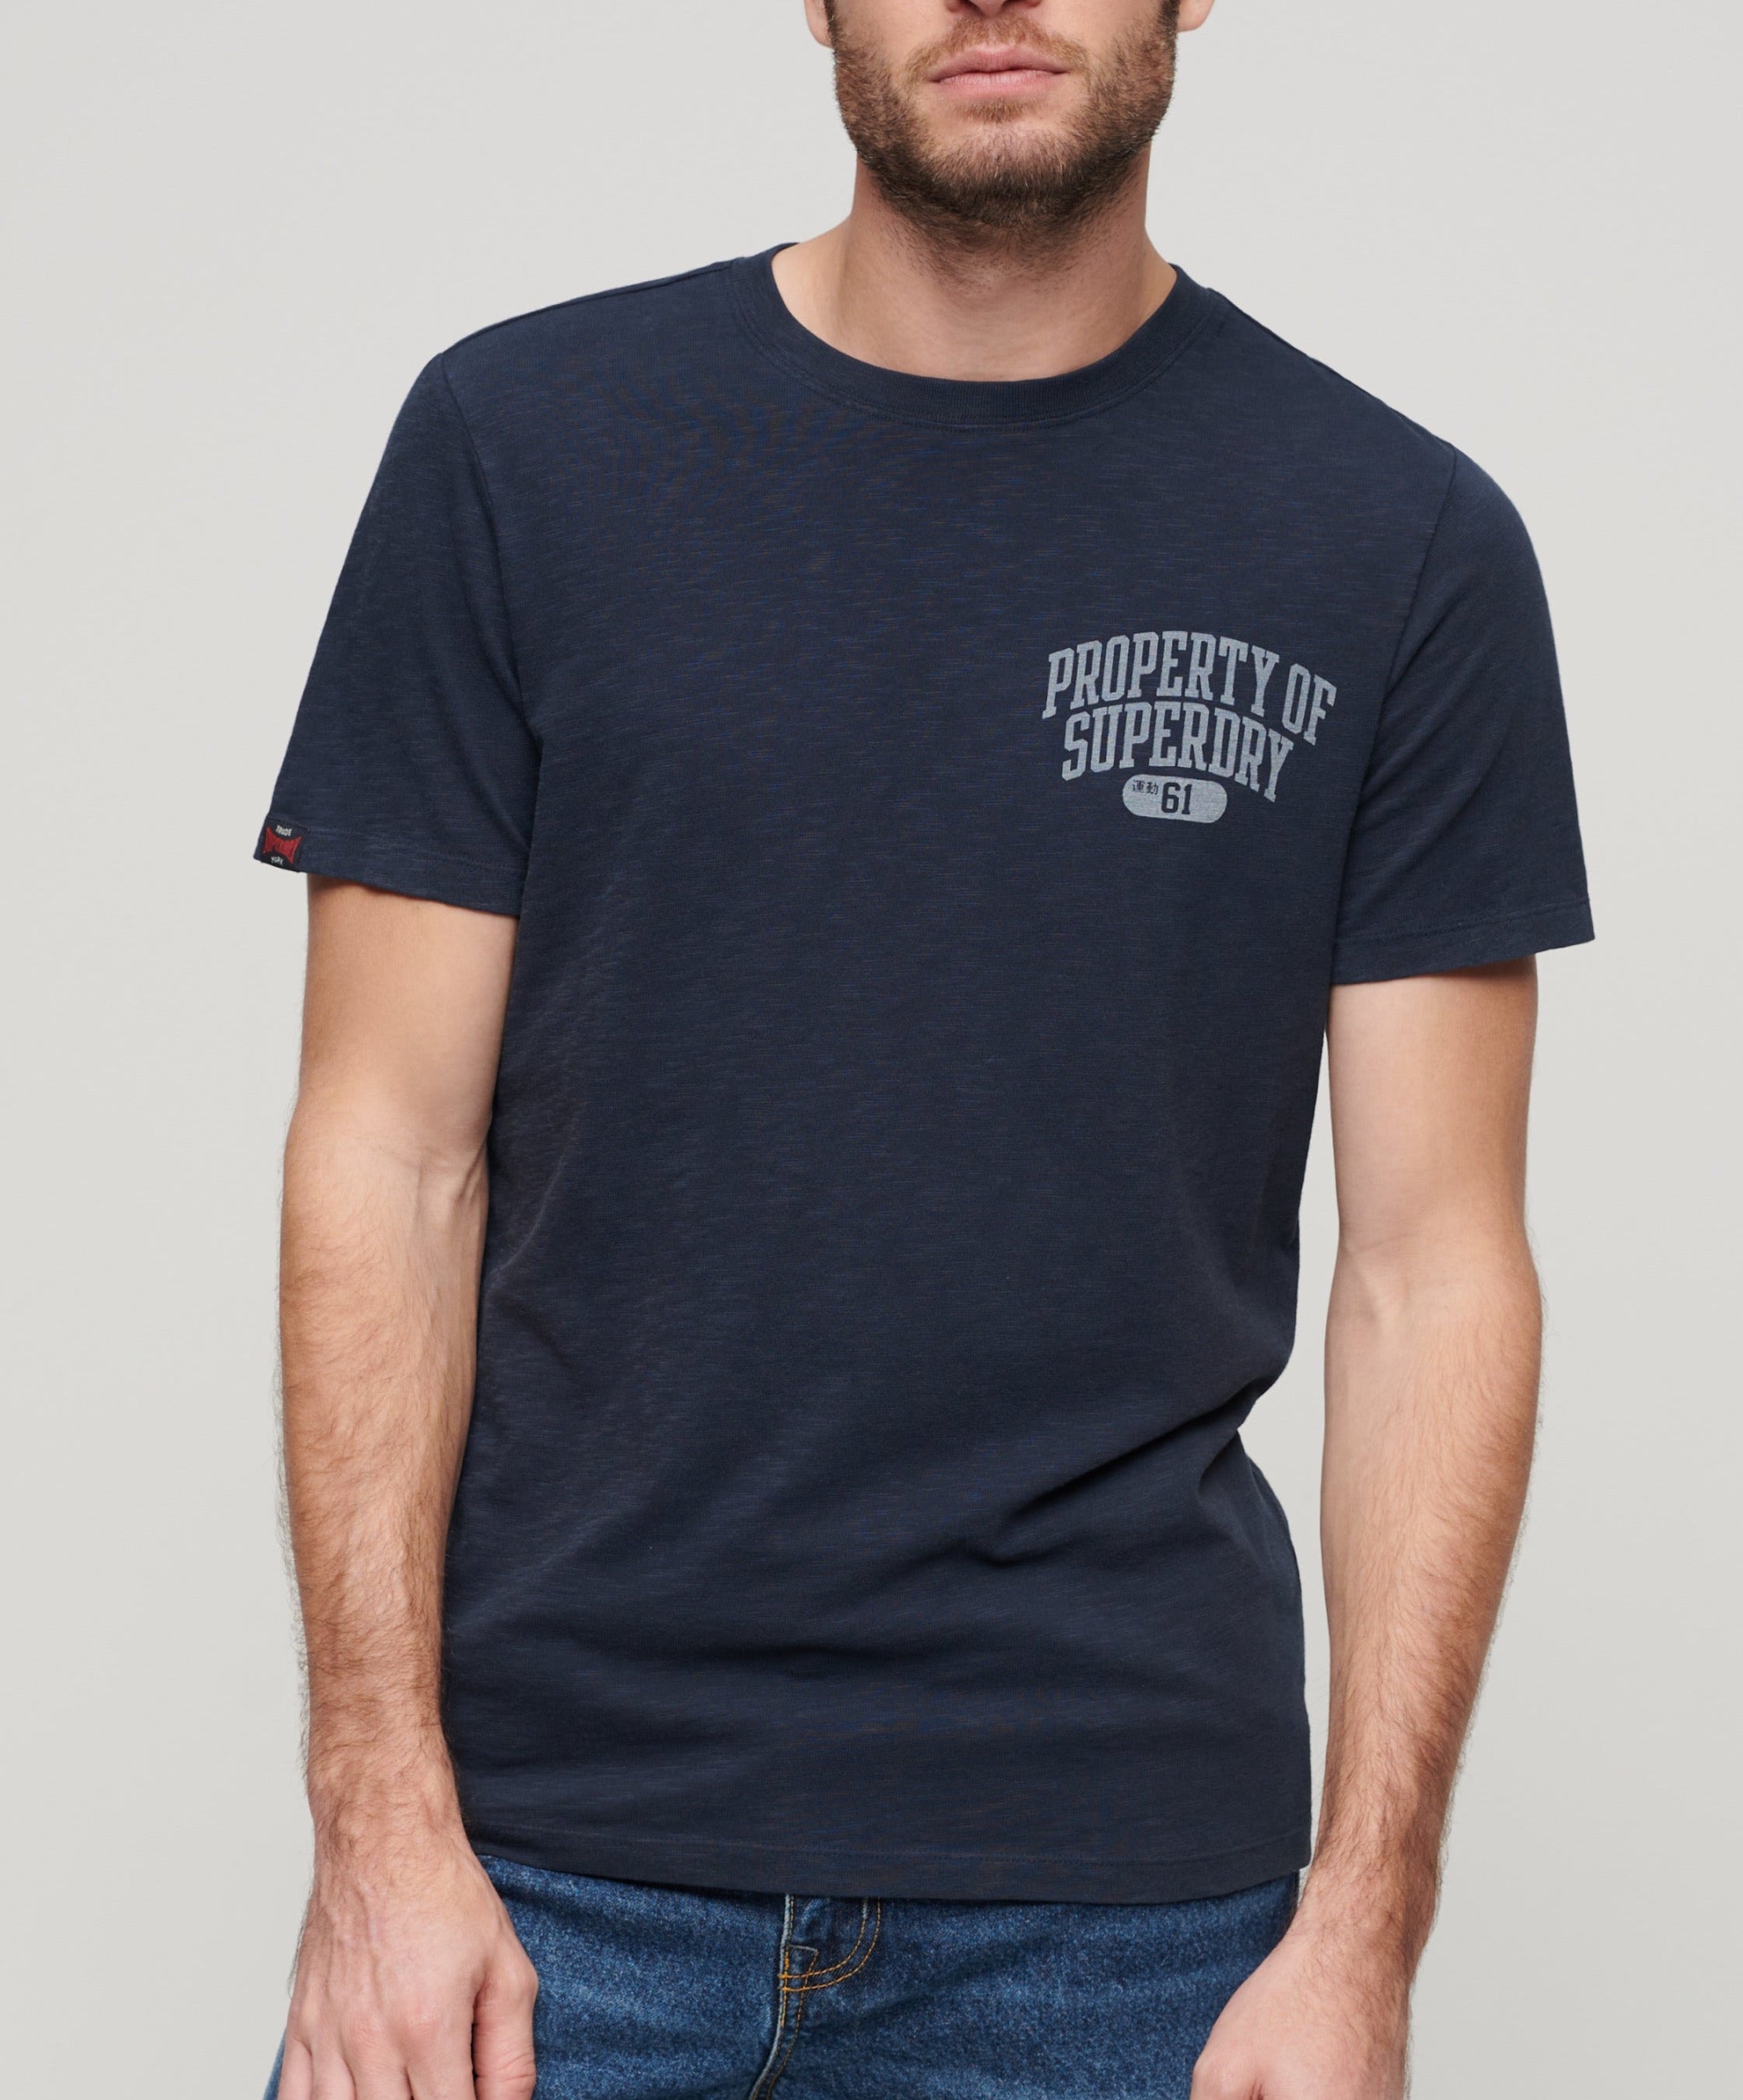 ATHLETIC COLLEGE GRAPHIC TEE